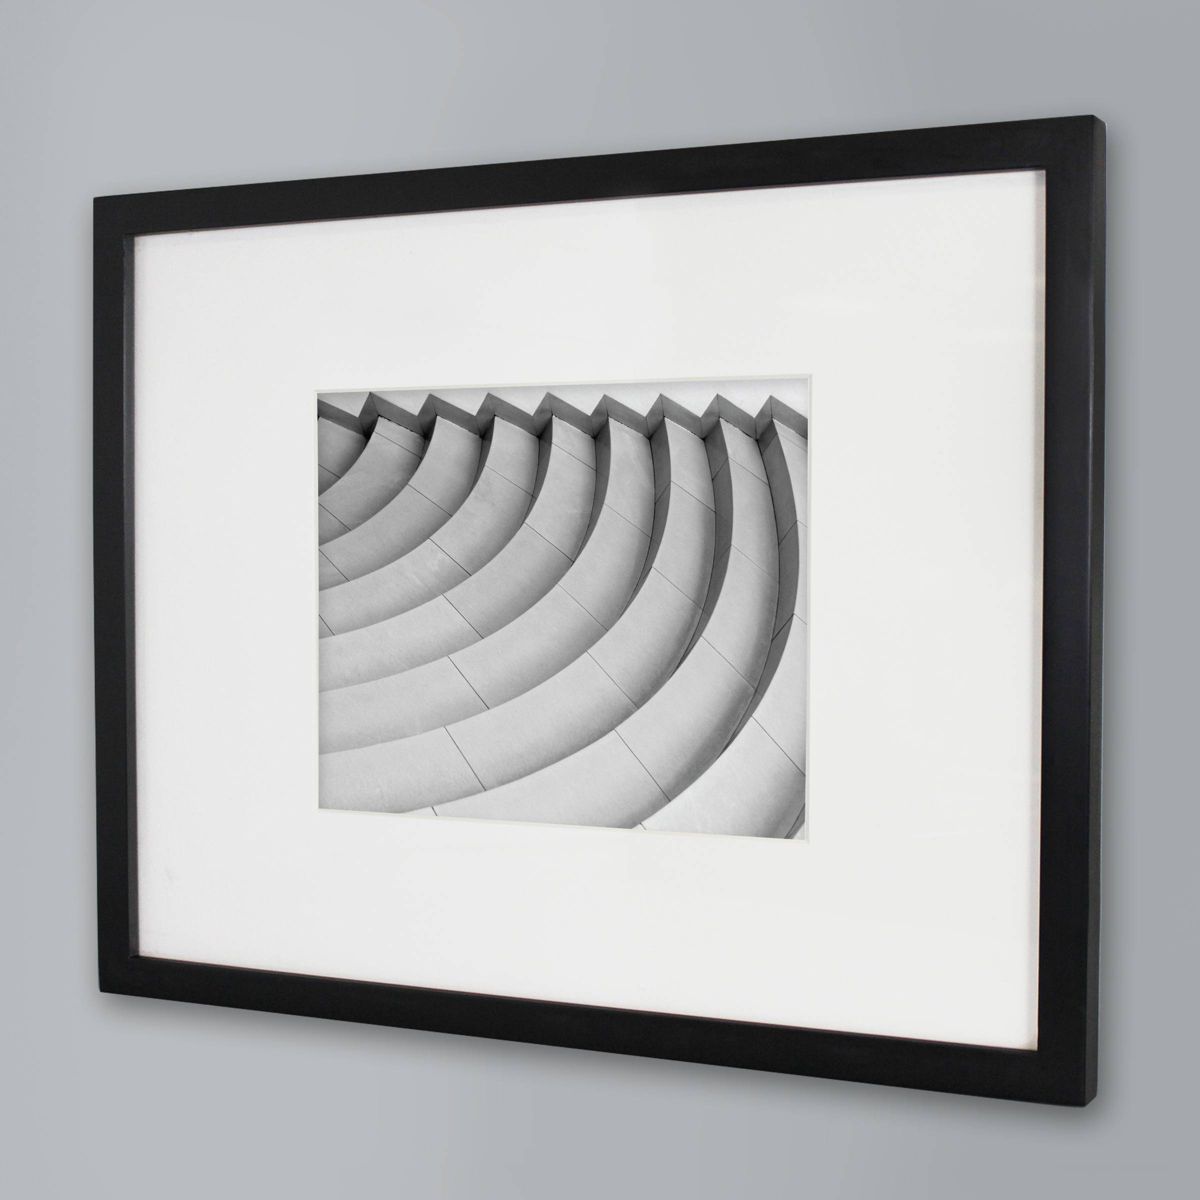 14" x 18" Matted to 8" x 10" Thin Gallery Frame - Threshold™ | Target